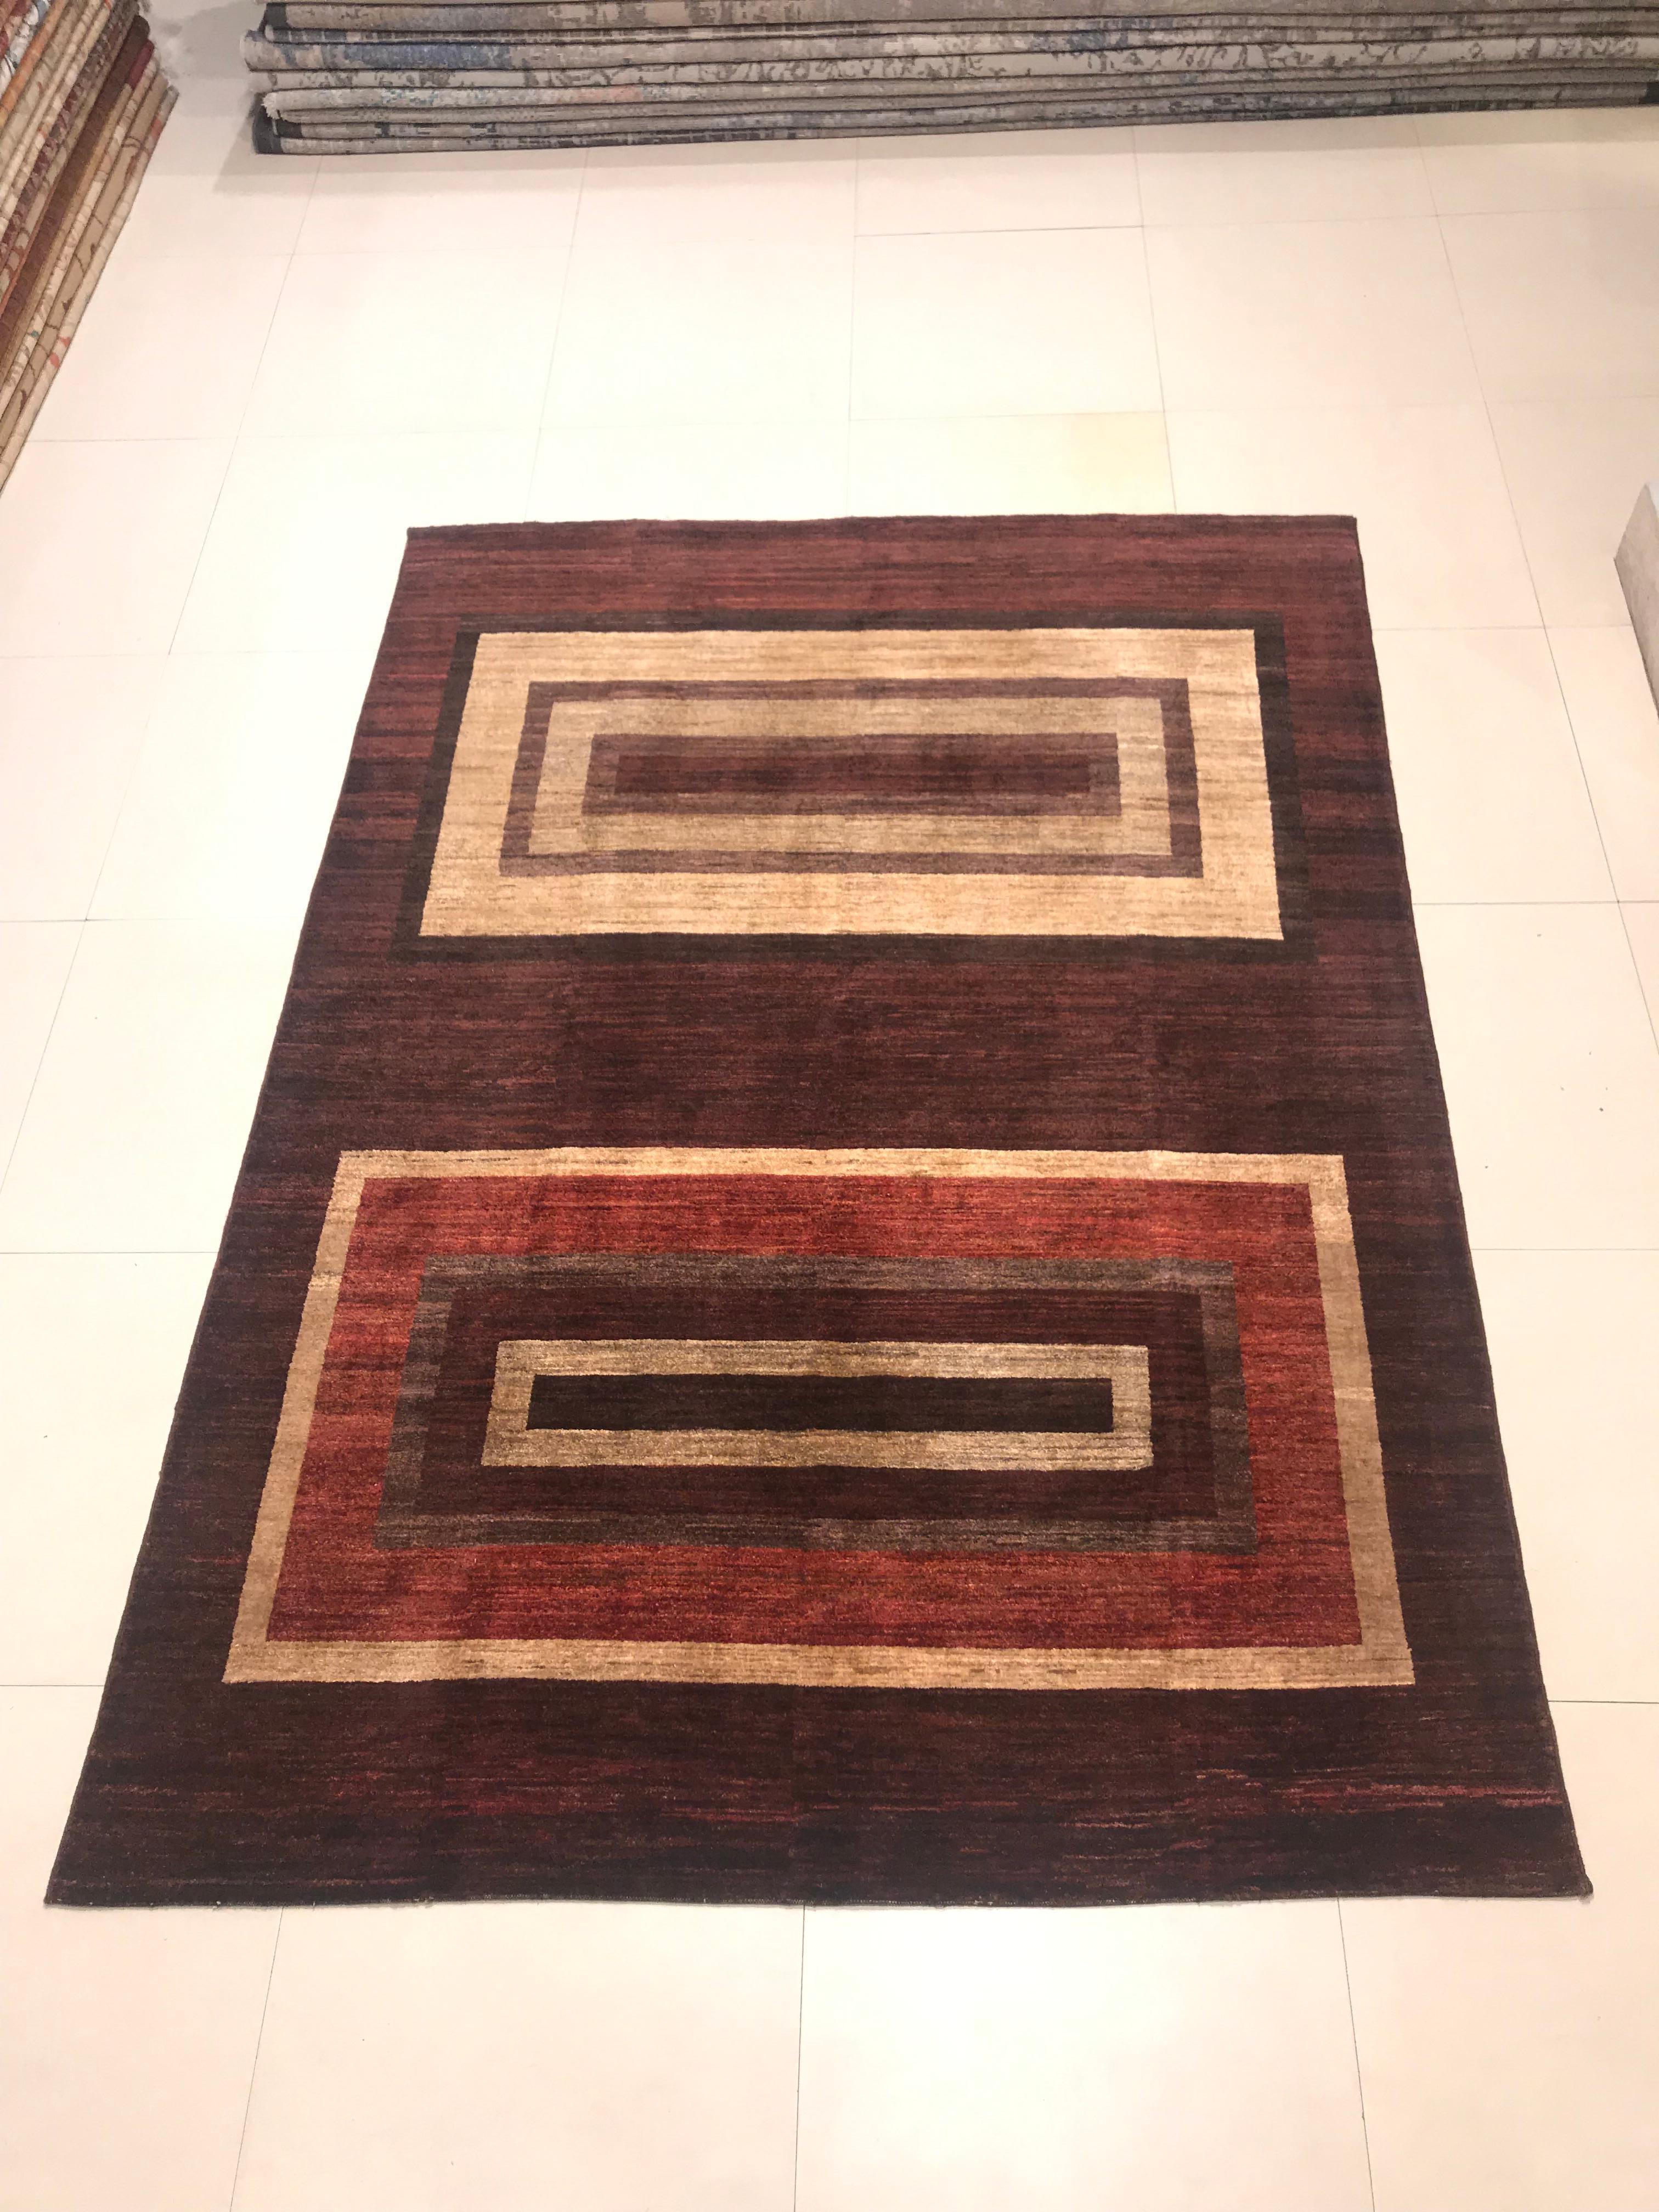 Afghan rug, from the 1970s, hand knotted with wool and cotton.
This set of carpet has geometric drawings, gives off a combination of soft colors such as red, beige and brown that makes it a perfect piece to decorate a corner of our home.